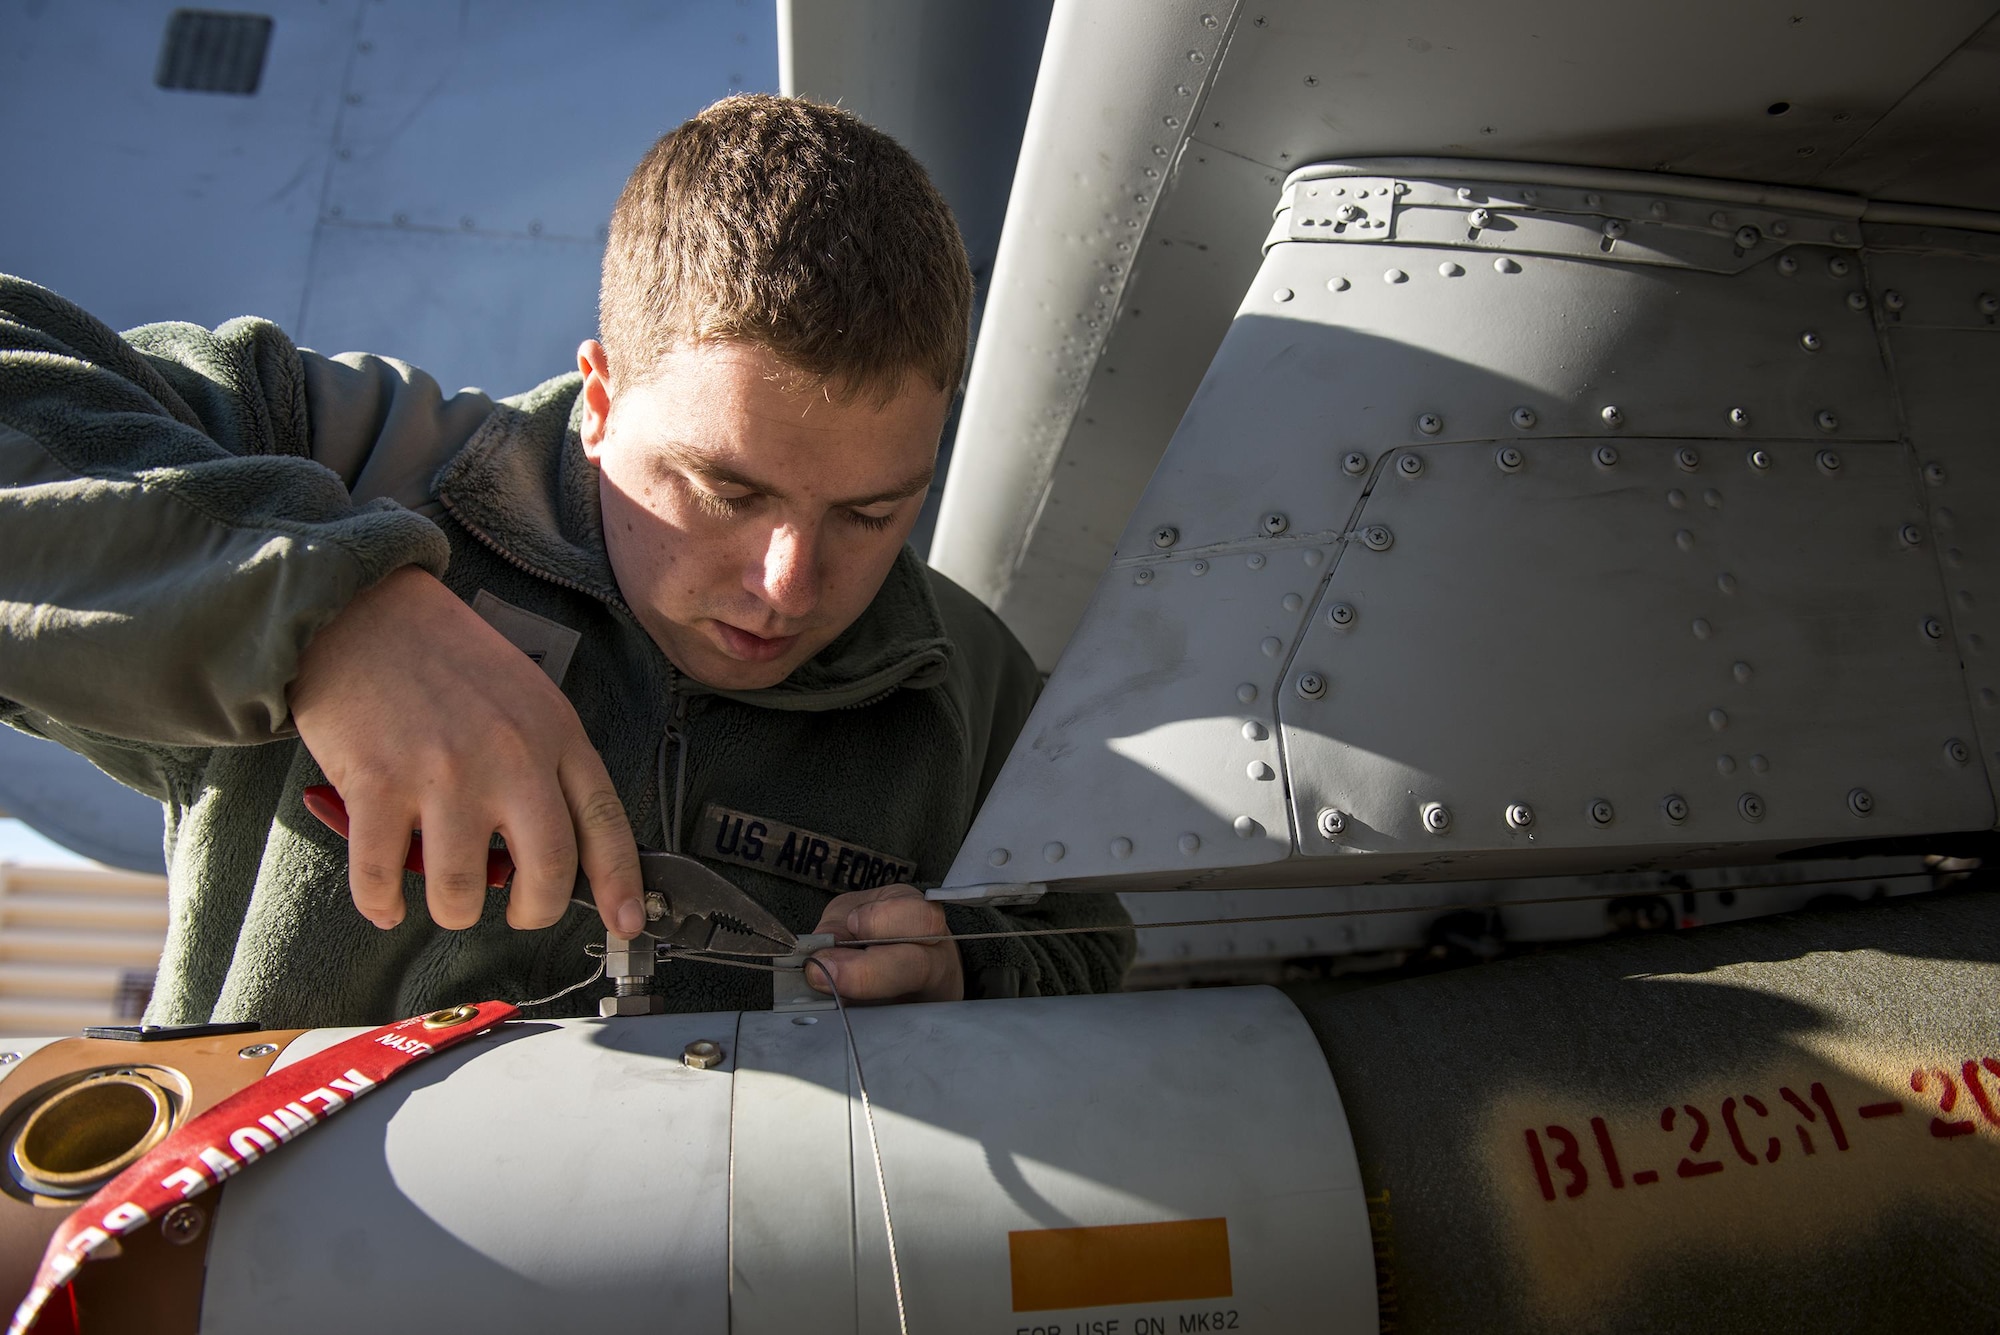 Airman First Class Connor McDonald, 74th Aircraft Maintenance Unit weapons load team member, installs an arming wire on a GBU-12 Paveway II laser-guided bomb during Green Flag-West 17-03, Jan. 24, 2017, at Nellis Air Force Base, Nev. Weapons Airmen enabled joint force training during the two-week exercise by loading weapons, inspecting jets and maintaining munitions systems. Some of the live munitions included the Mark 82 and 84 general purpose bombs, high-explosive incendiary 30mm rounds and the 500 pound GBU-12 Paveway II laser-guided bomb. (U.S. Air Force photo by Staff Sgt. Ryan Callaghan)